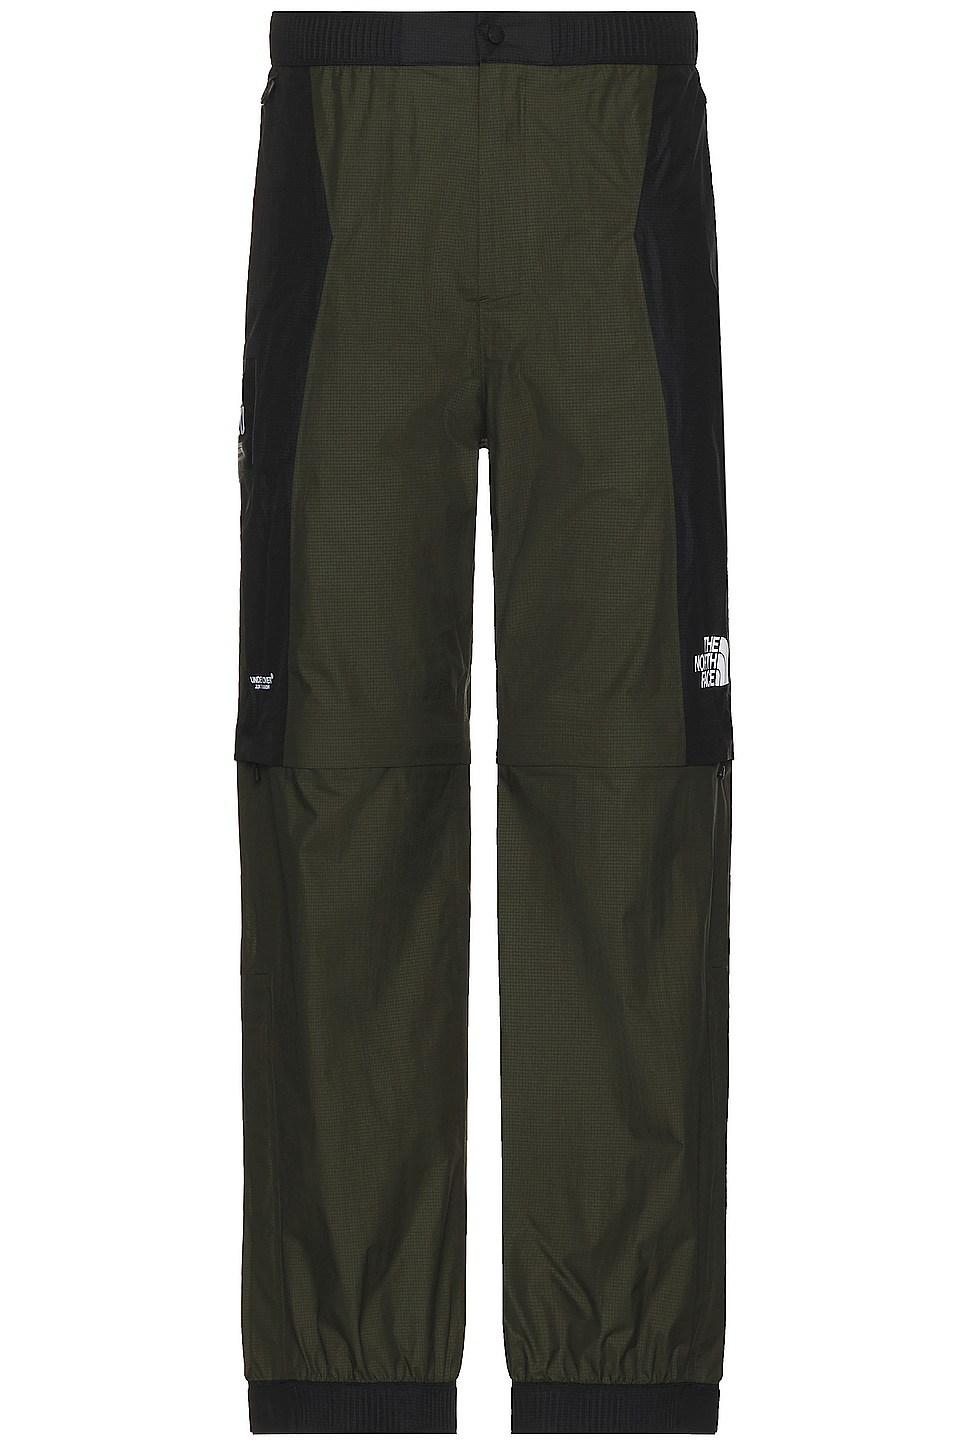 Image 1 of The North Face Soukuu Hike Convertible Shell Pant in Tnf Black & Forest Night